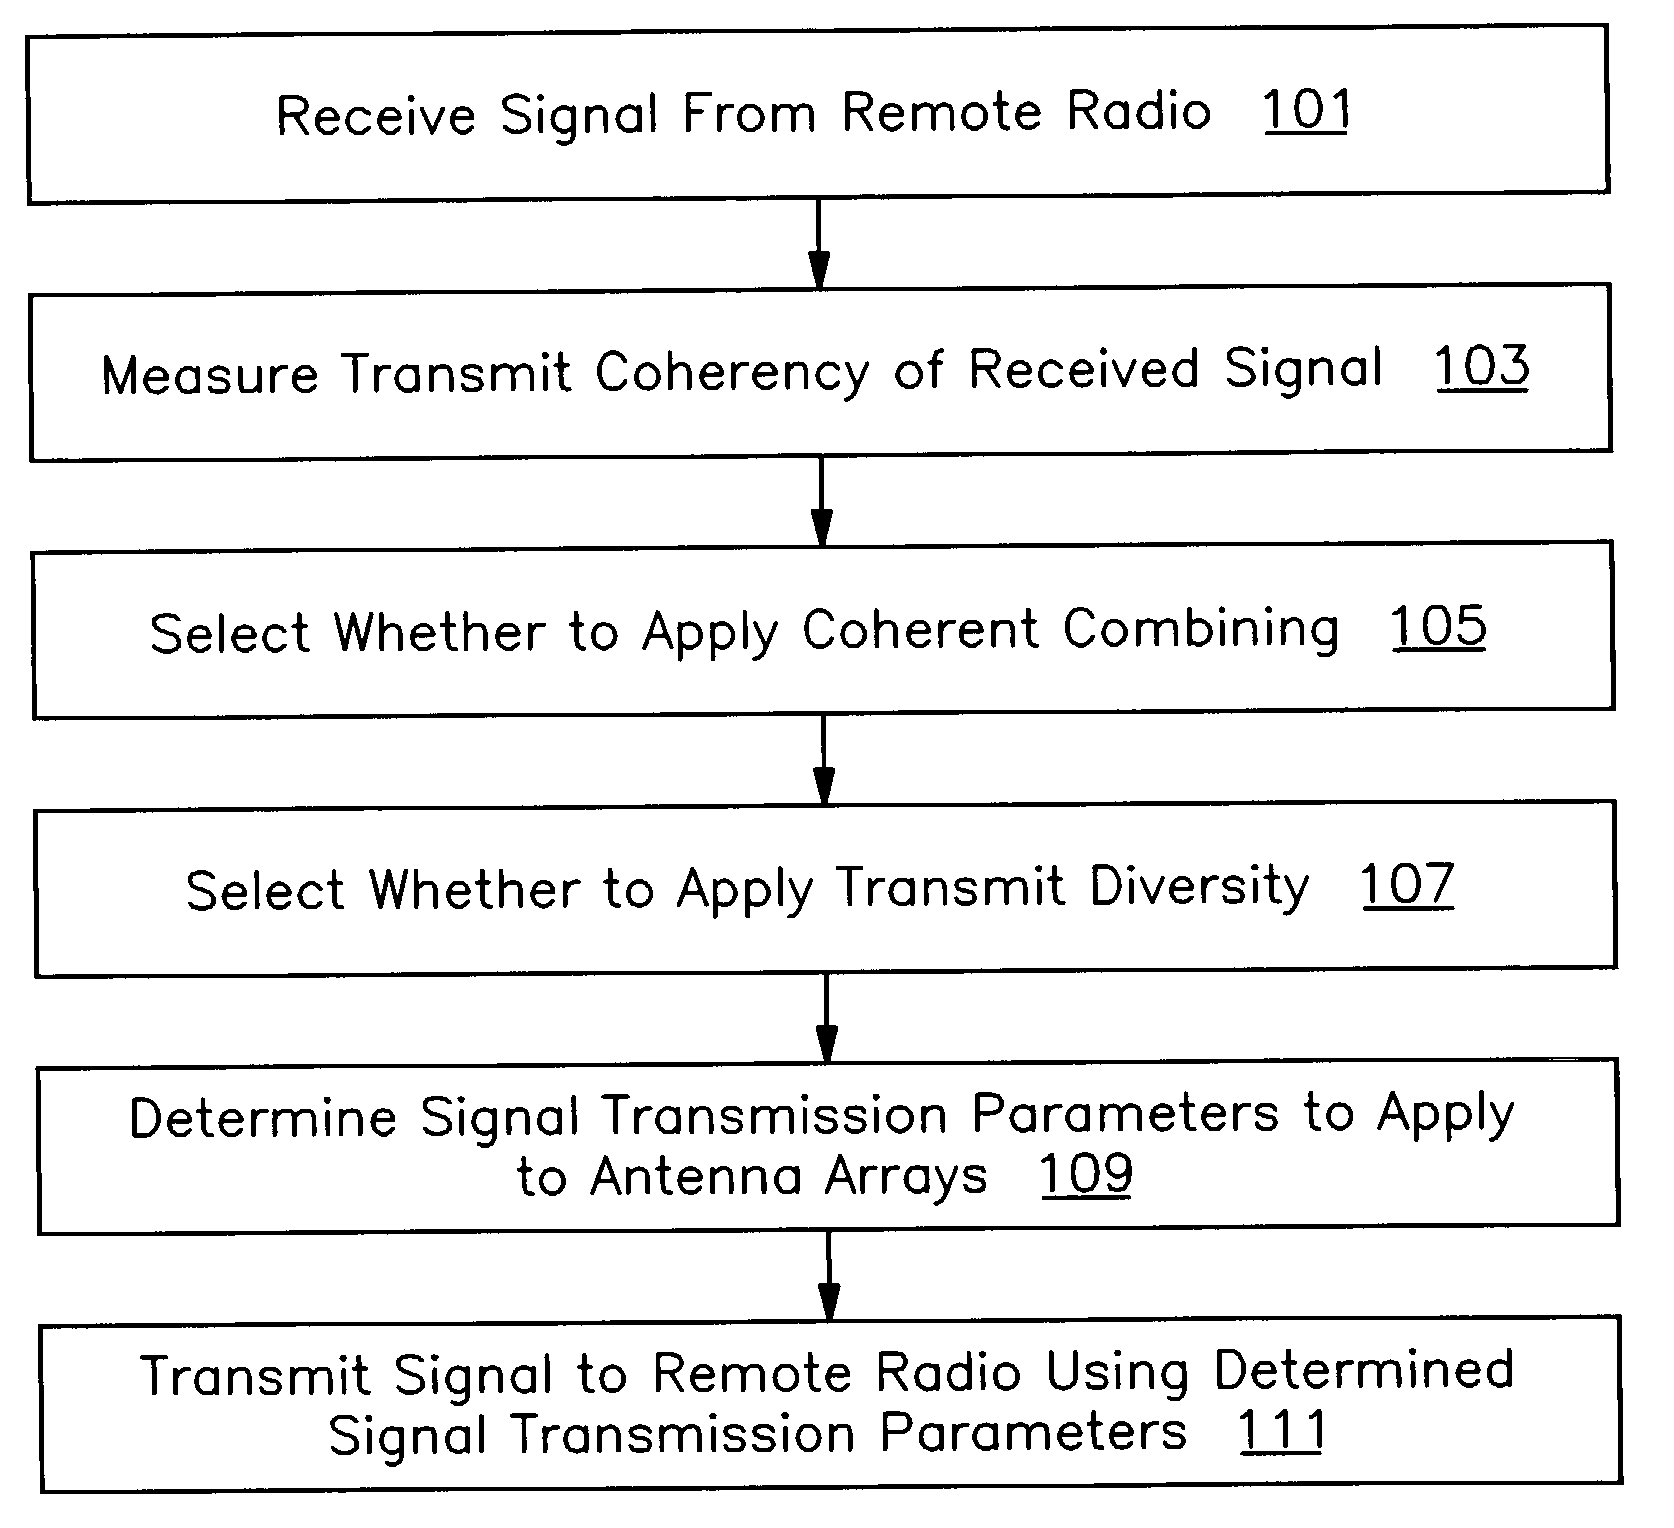 Beam forming and transmit diversity in a multiple array radio communications system